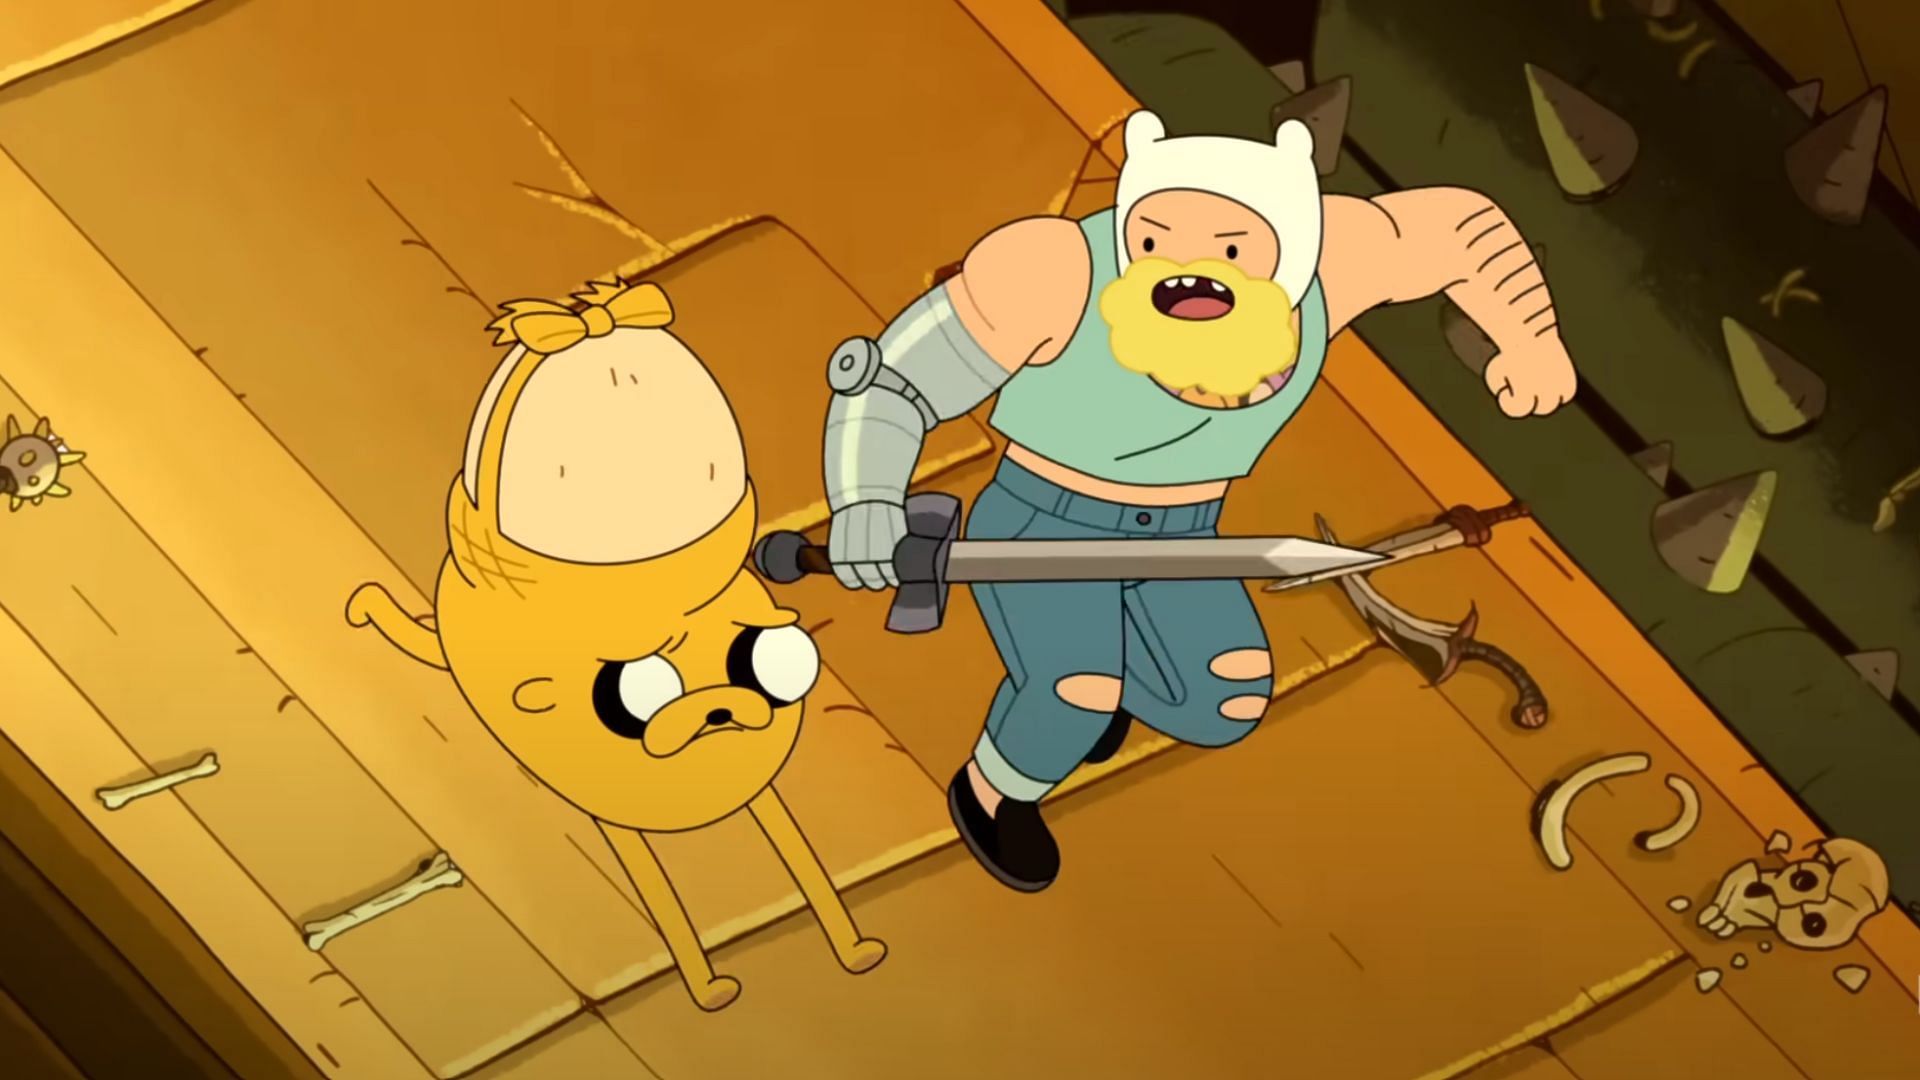 How old is Finn in Adventure Time: Fionna and Cake?